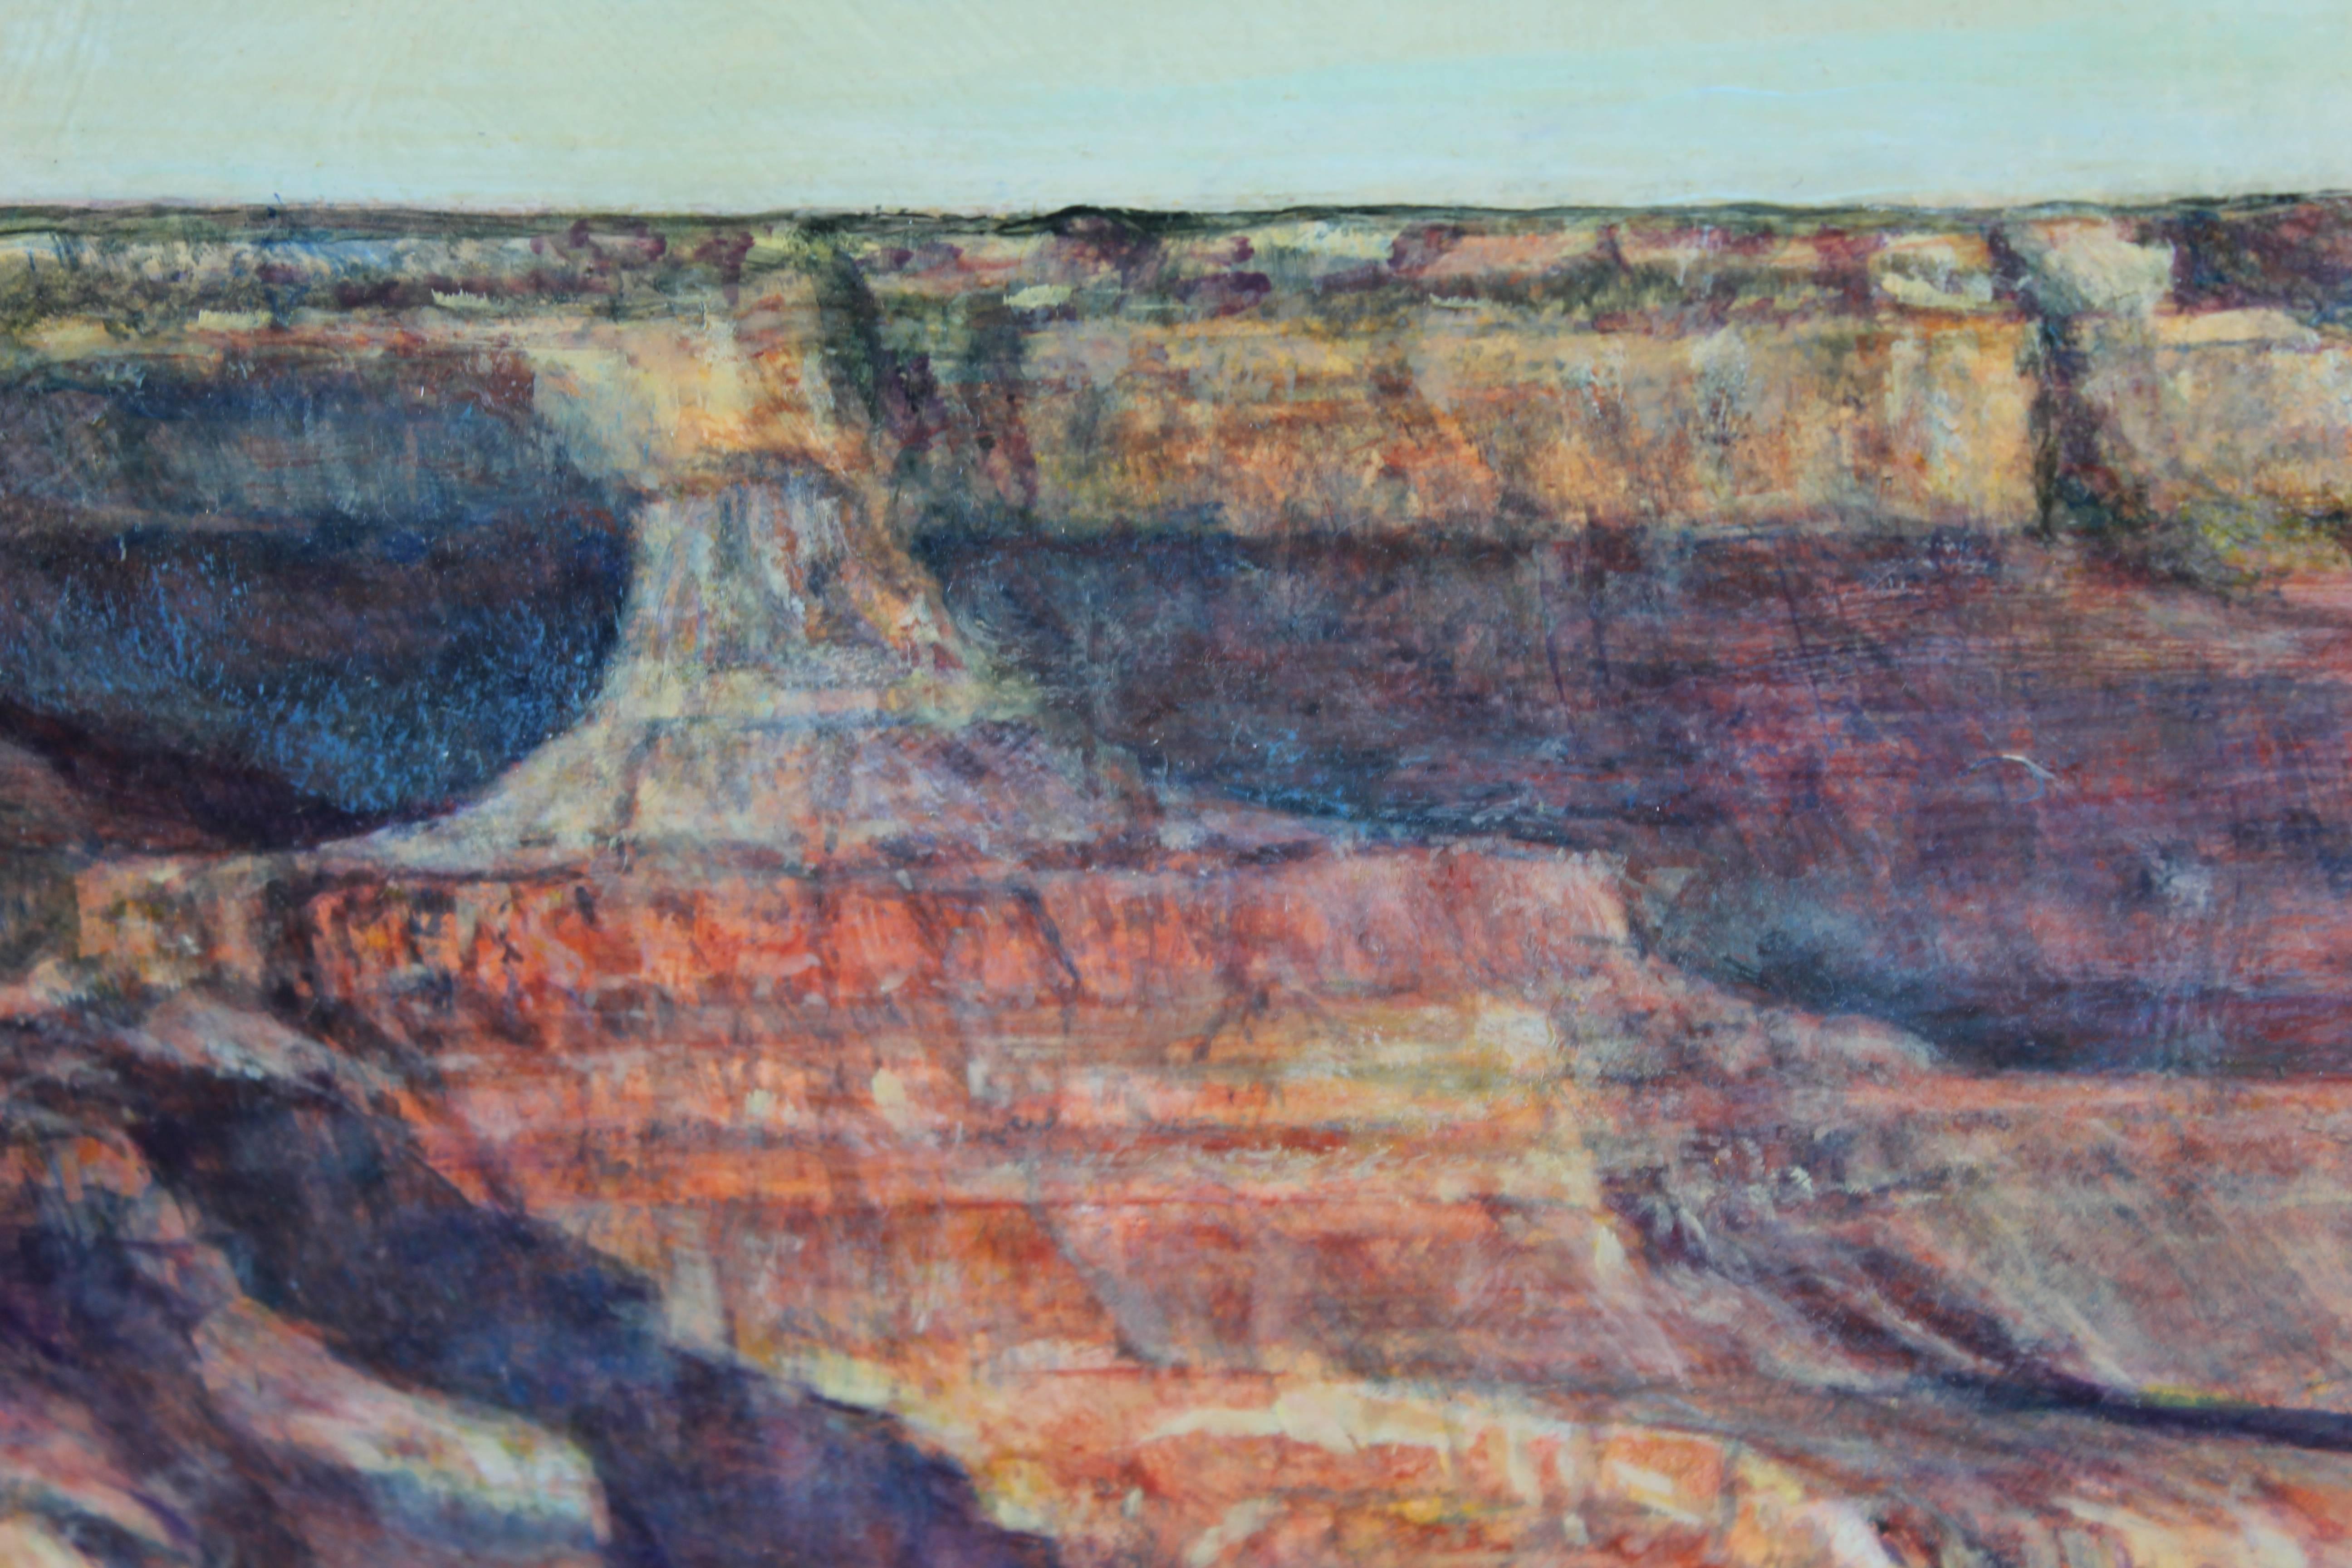 Canyon Shadows - Painting by Robert W. Boyle